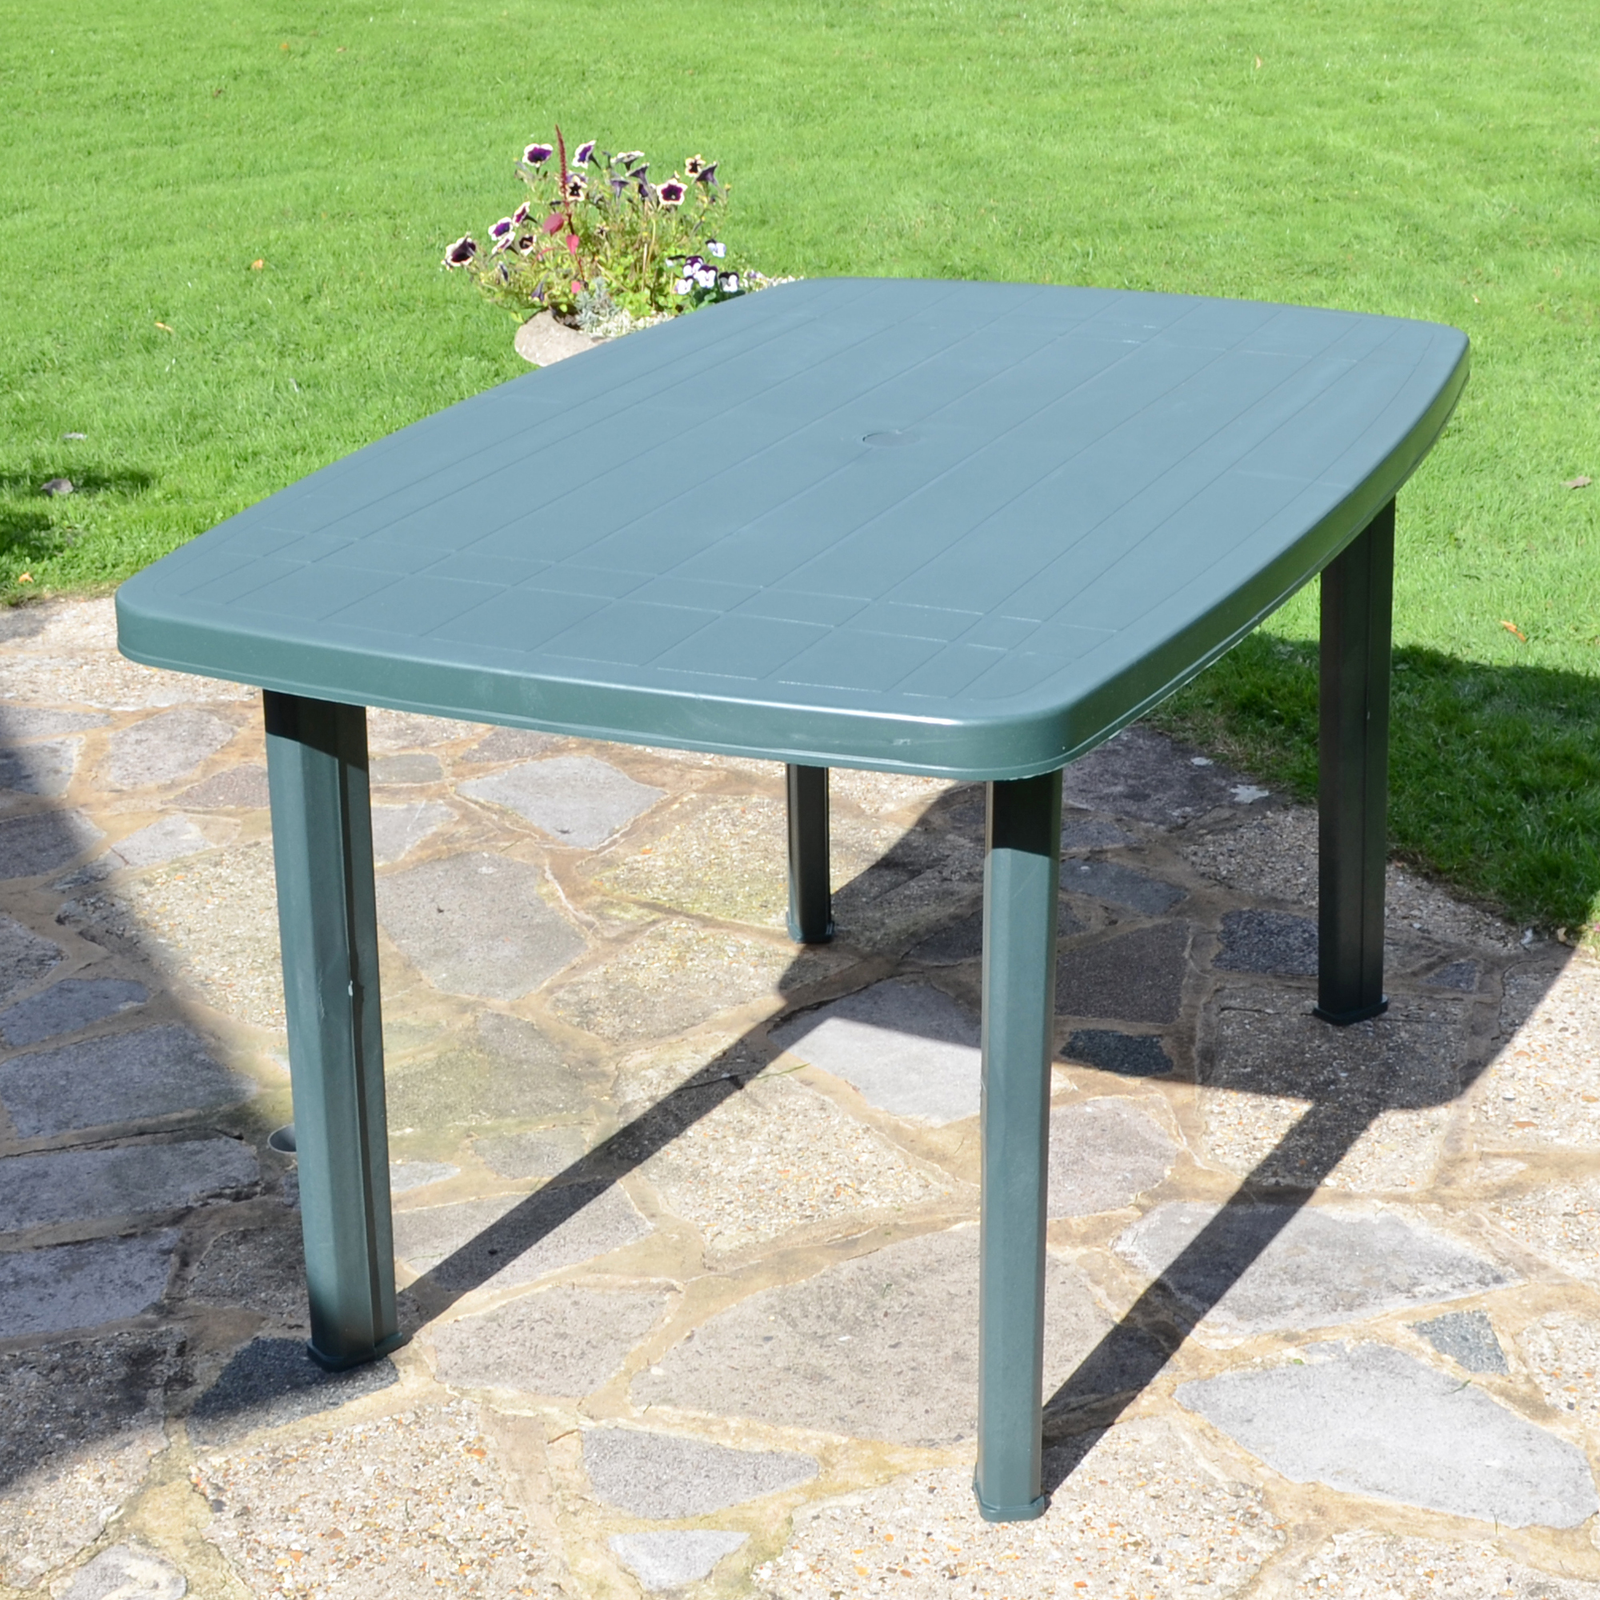 Trabella Rimini Rectangular Table With 4 Parma Chairs Set Green Dining Sets Trabella   